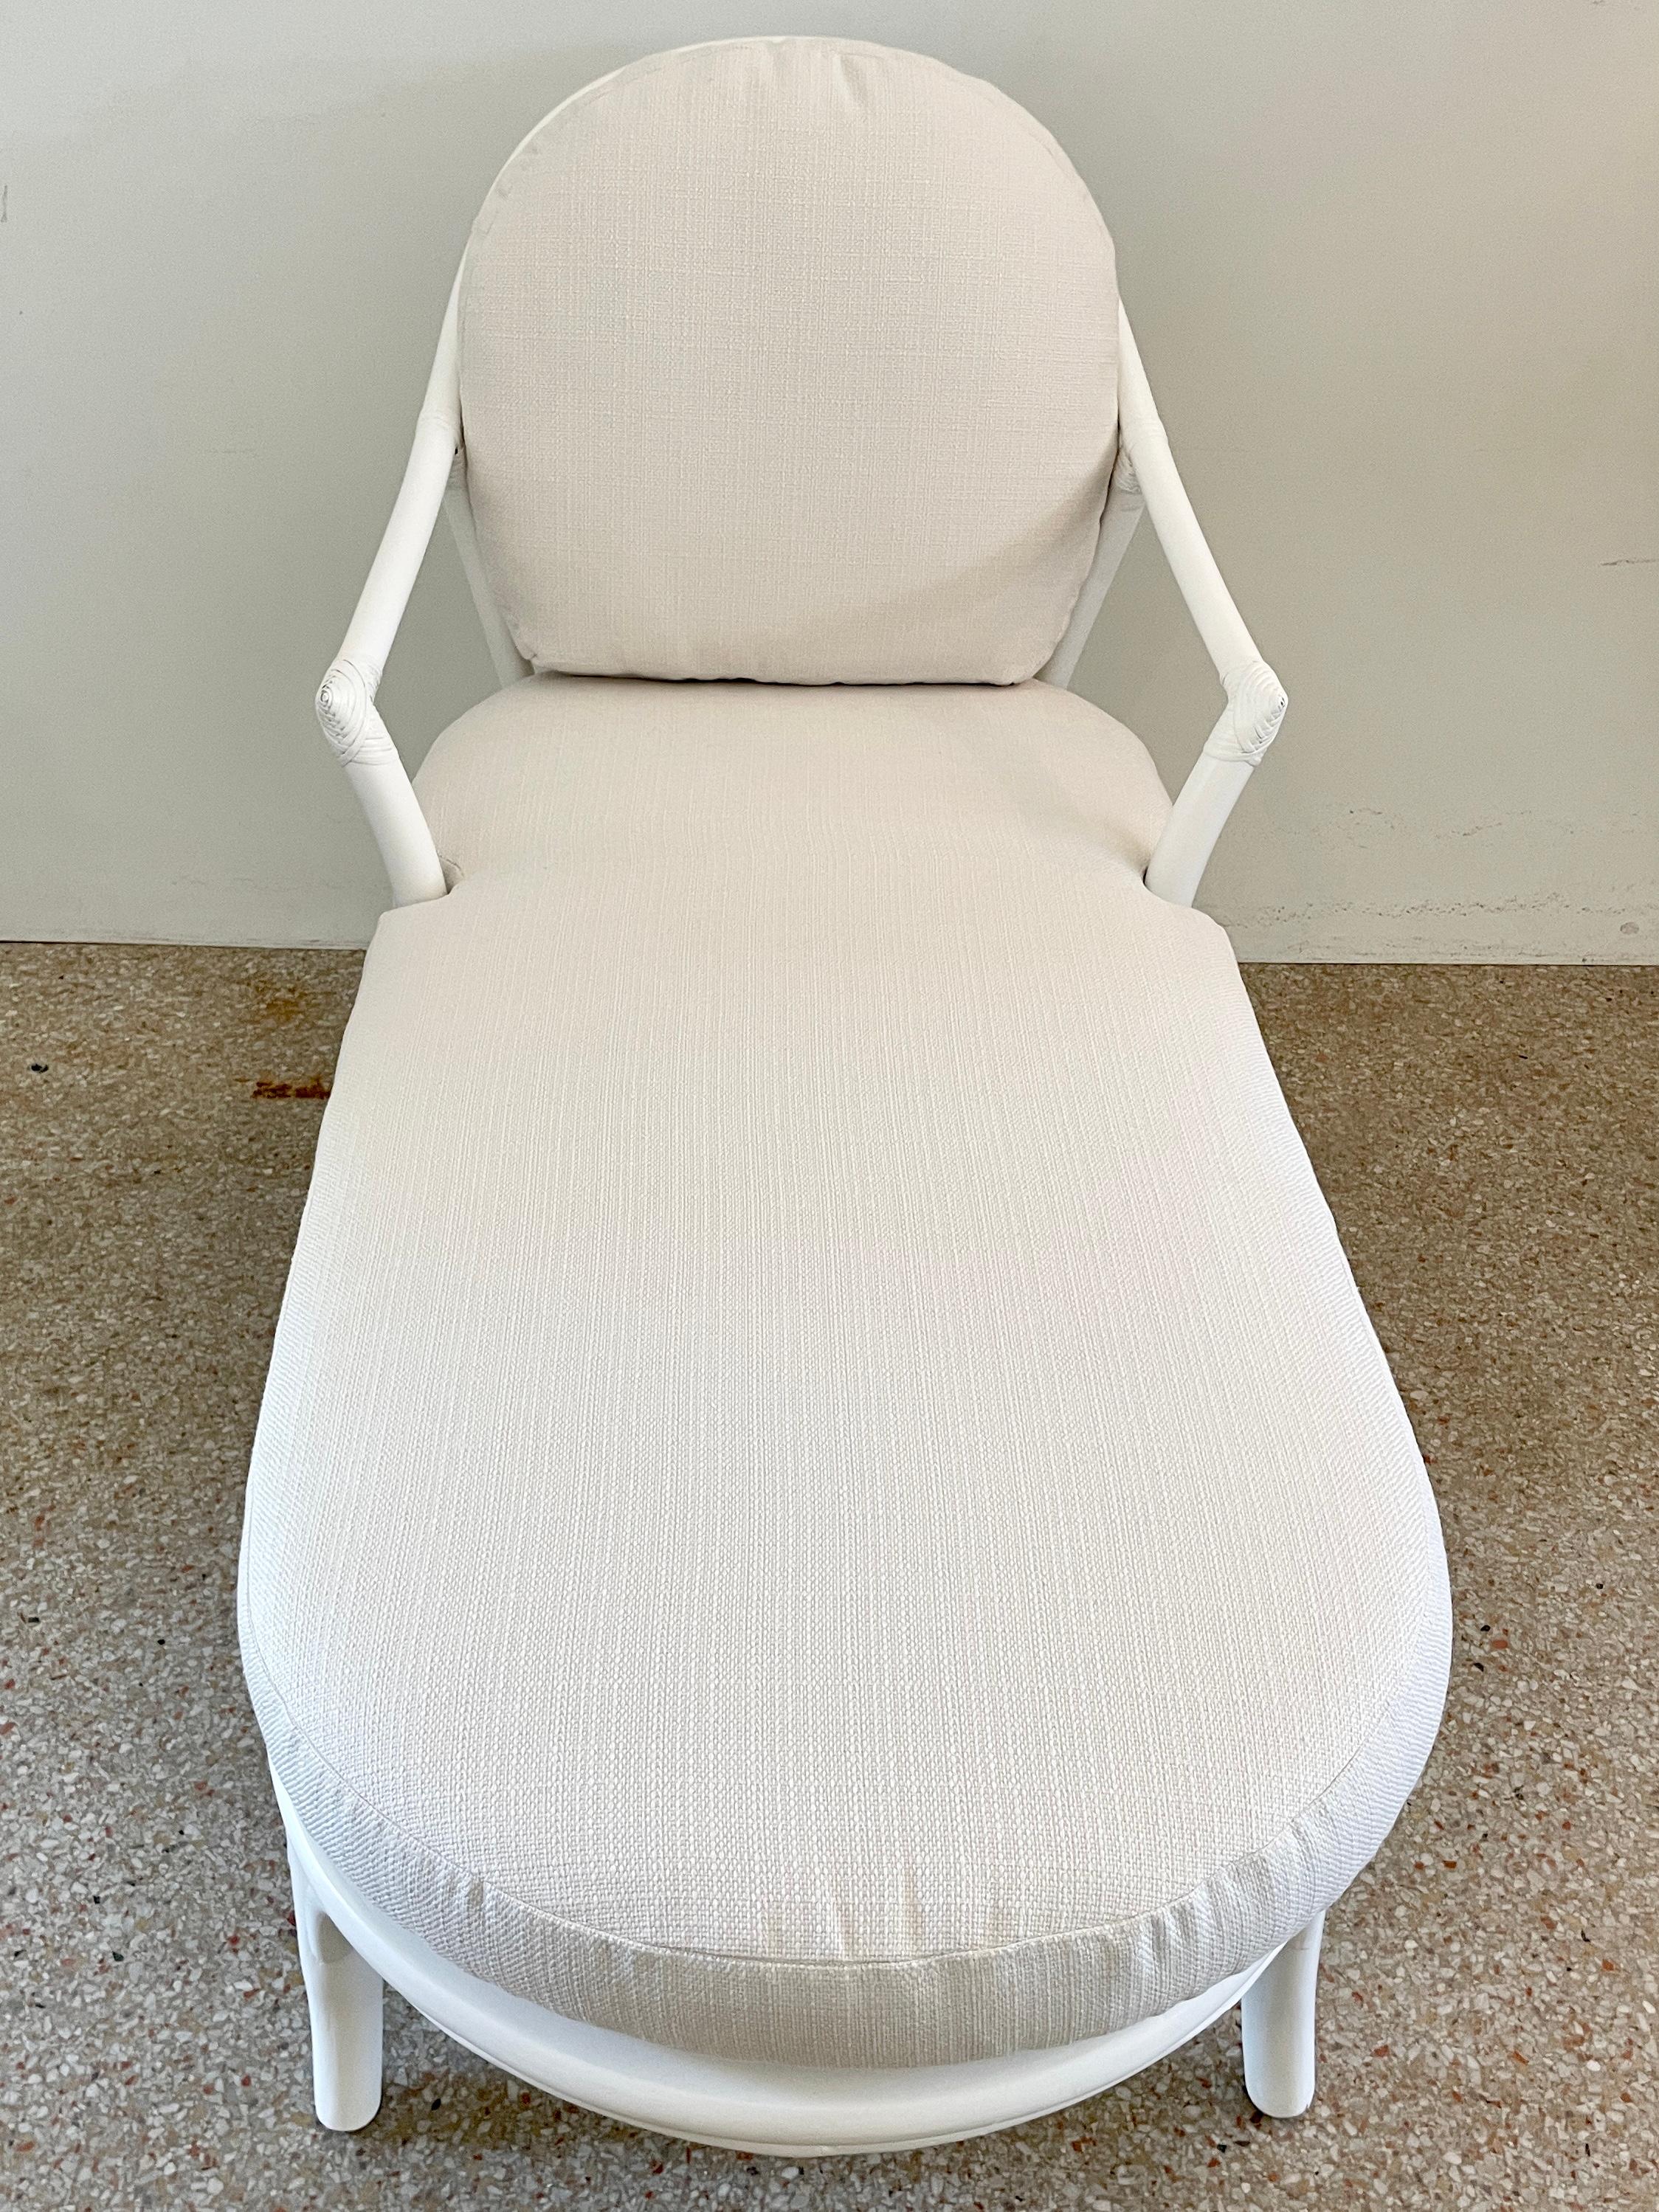 Beautiful boho chic Ficks Reed rattan chaise with new Todd Hase textiles cushions. Frame seat is made with cane and freshly lacquered in white. Great addition to your boho chic inspired interiors. We have two available! Upholstered in Todd Hase High